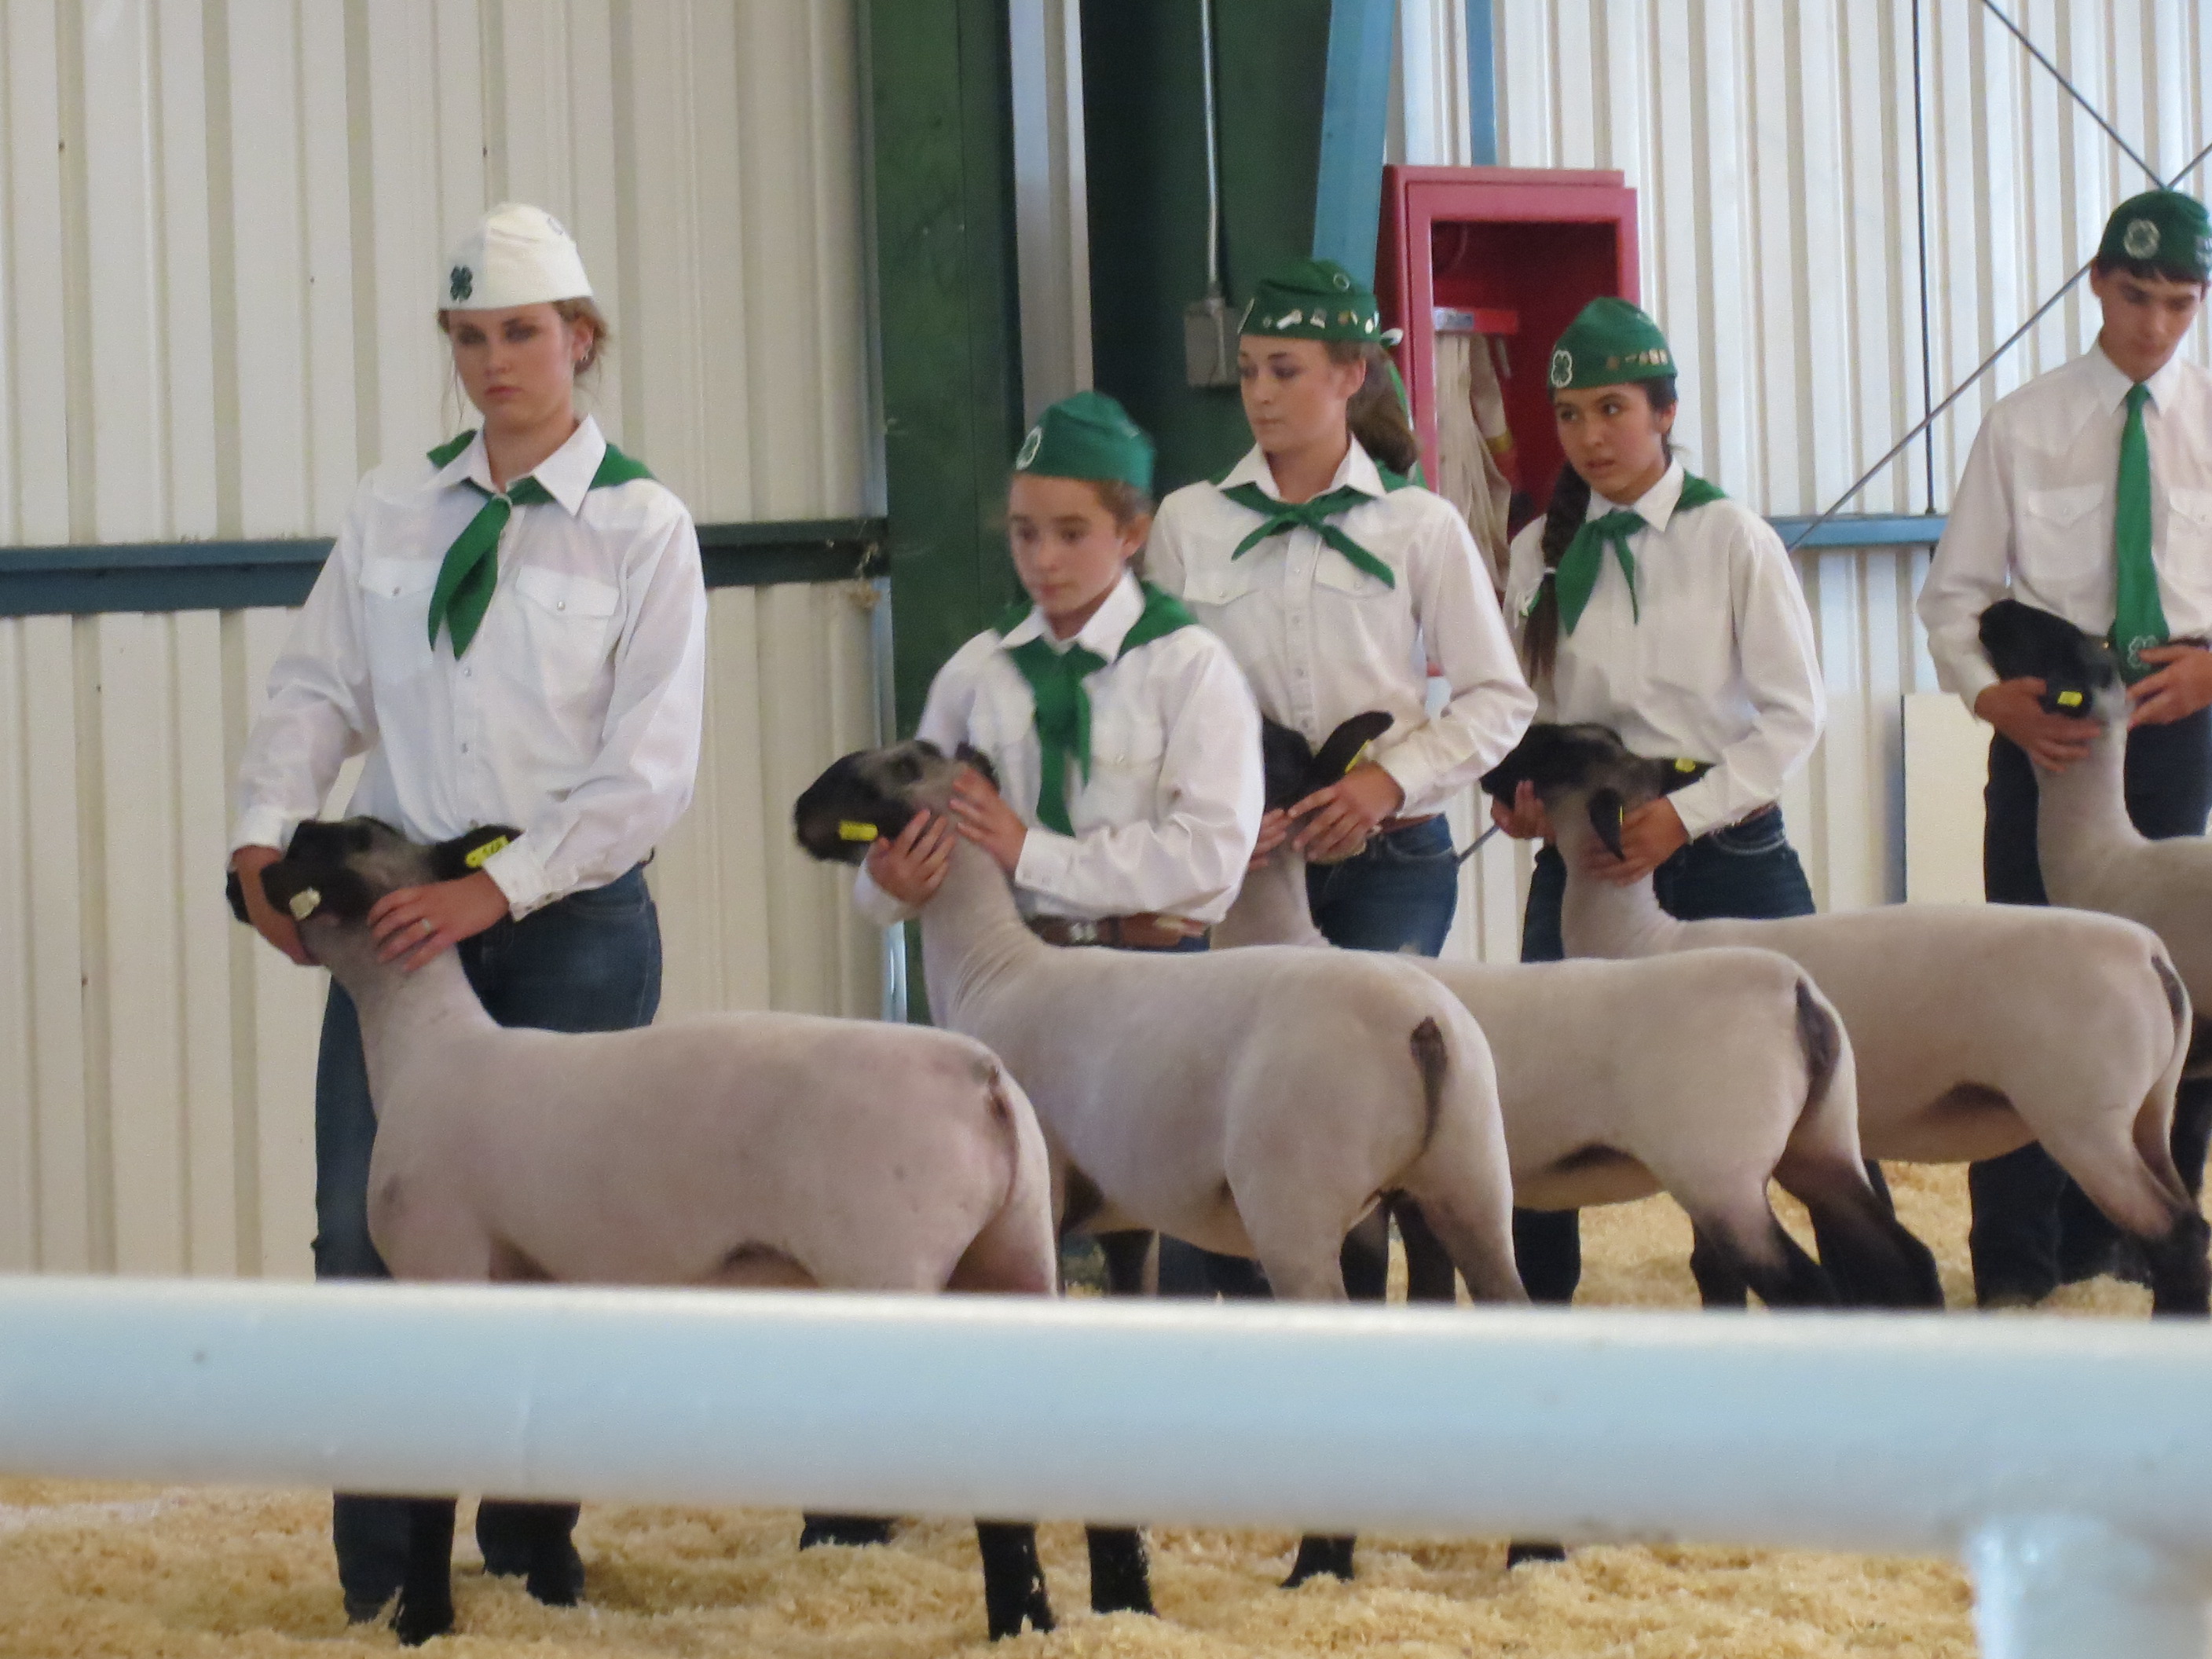 Inyo and Mono Counties Junior Livestock Show 4-H and FFA youth show the animals they've raised like sheep